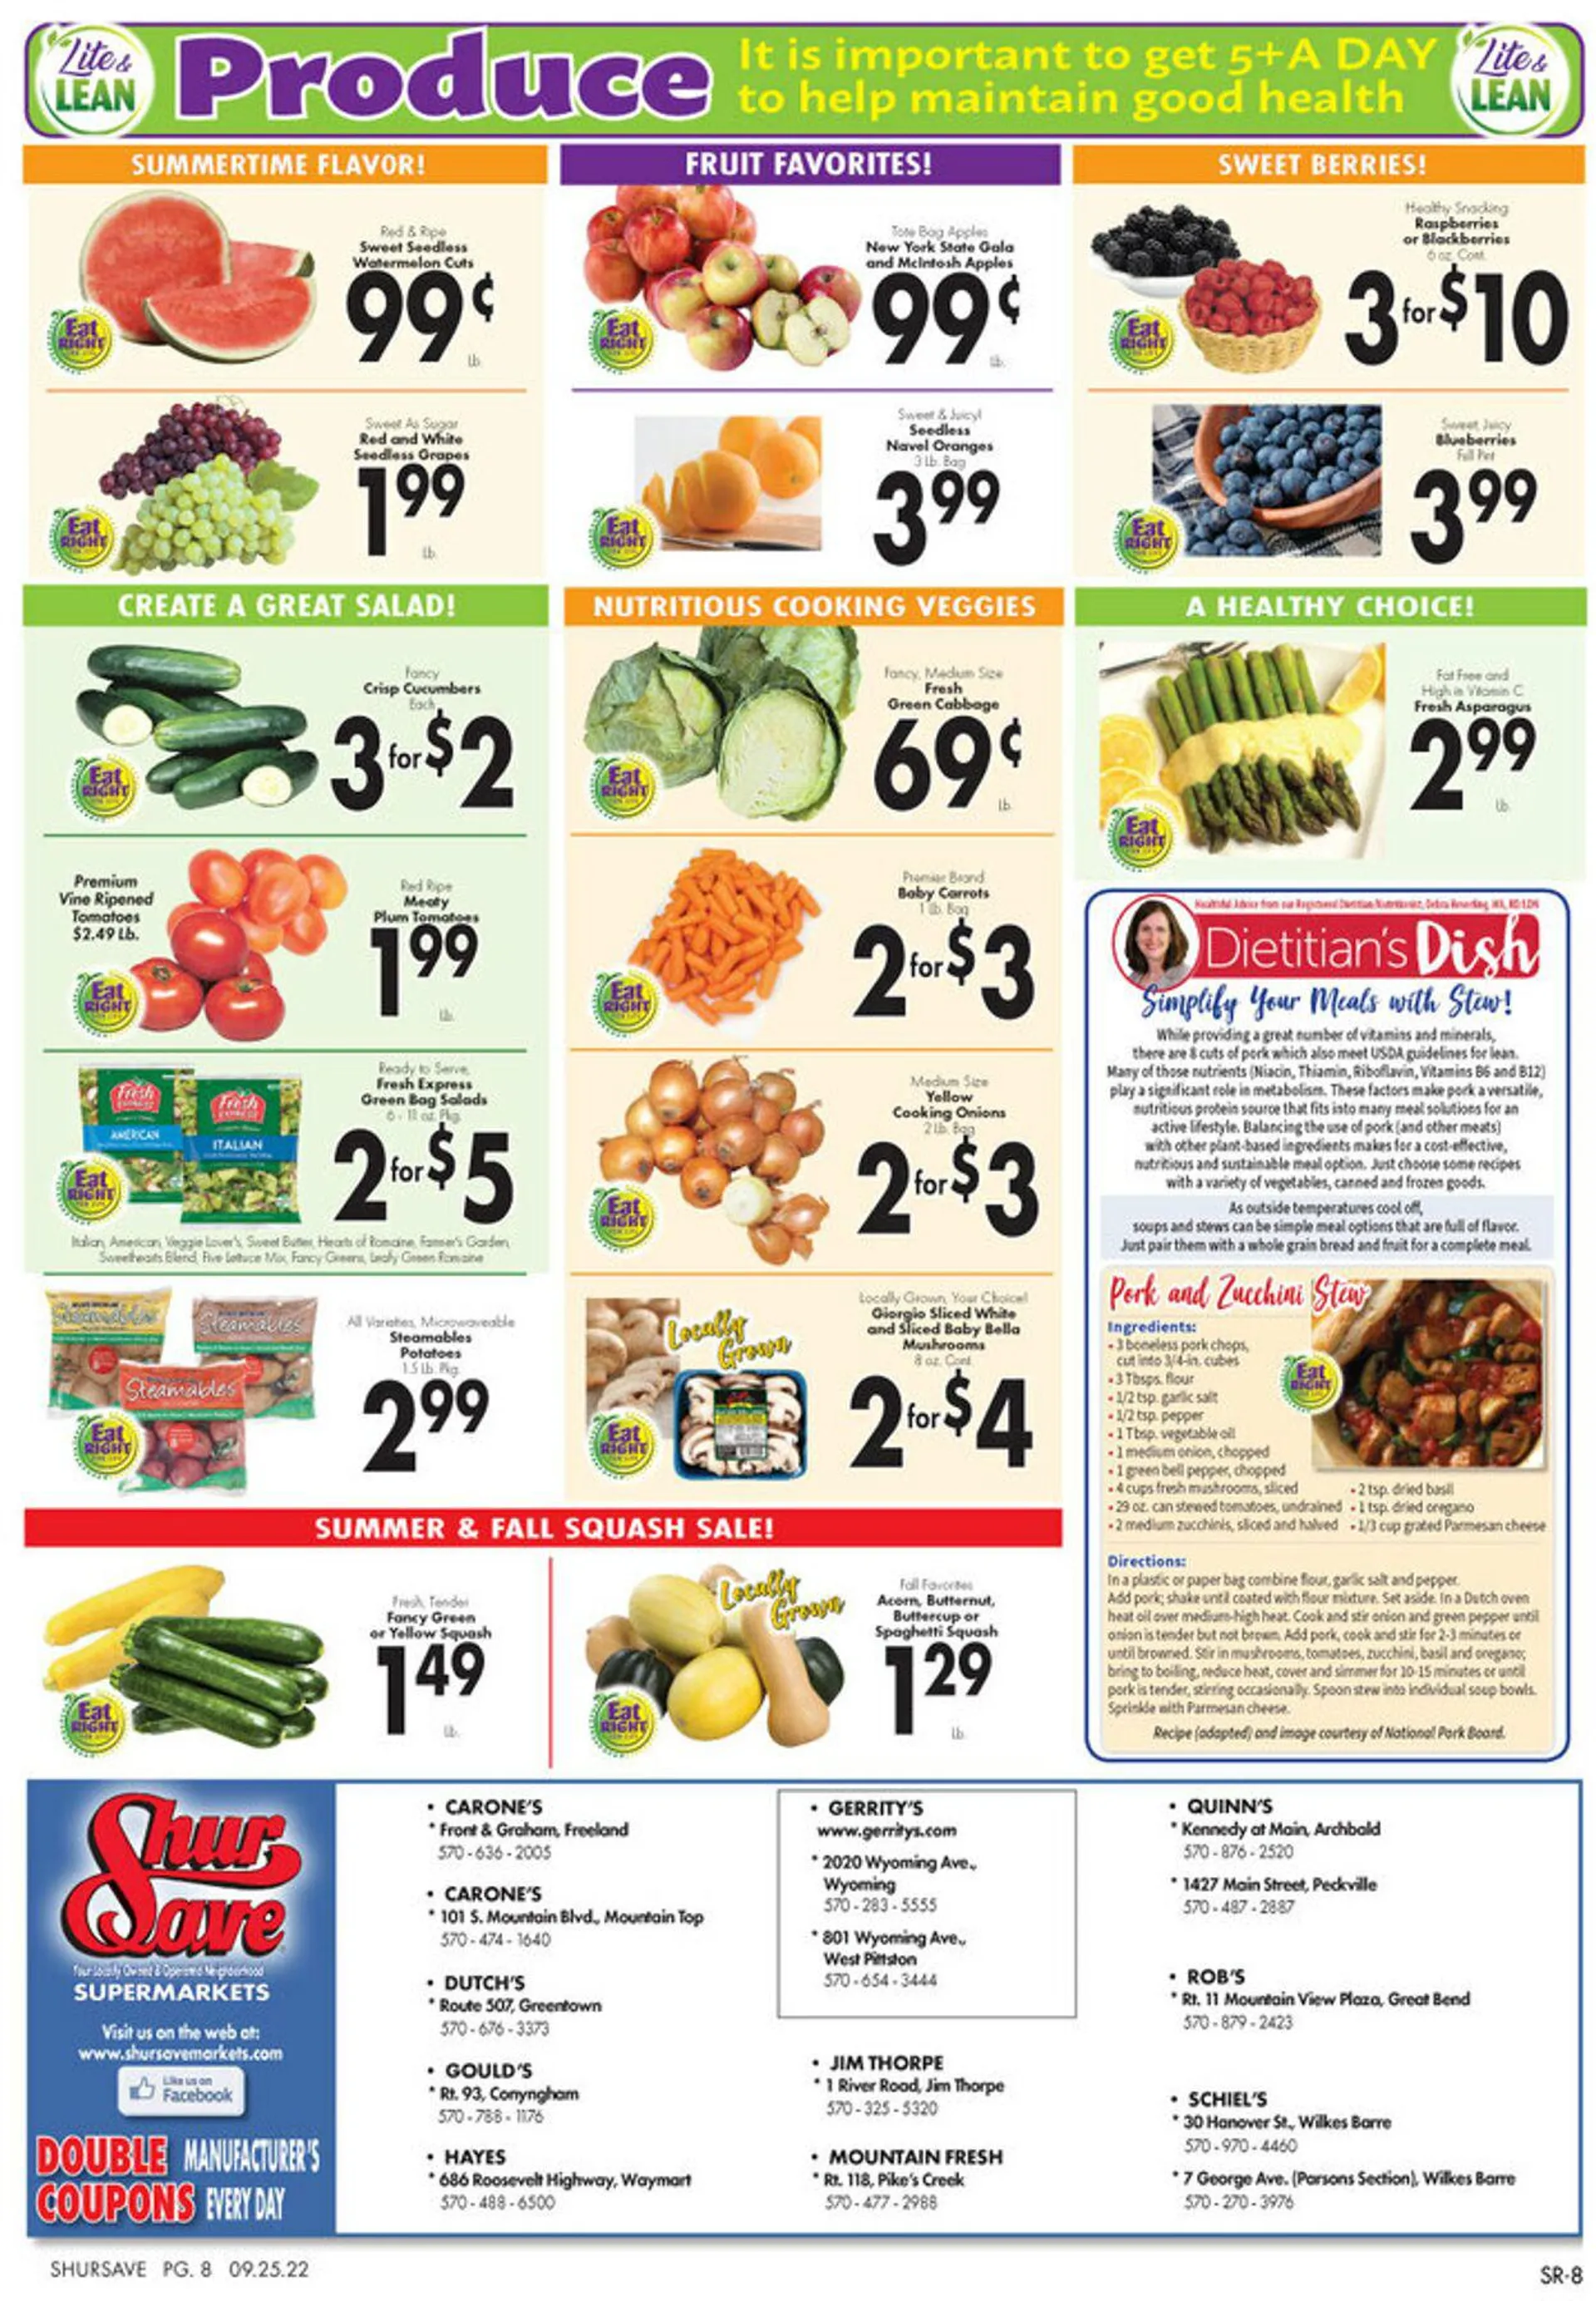 Gerritys Supermarkets Current weekly ad - 9